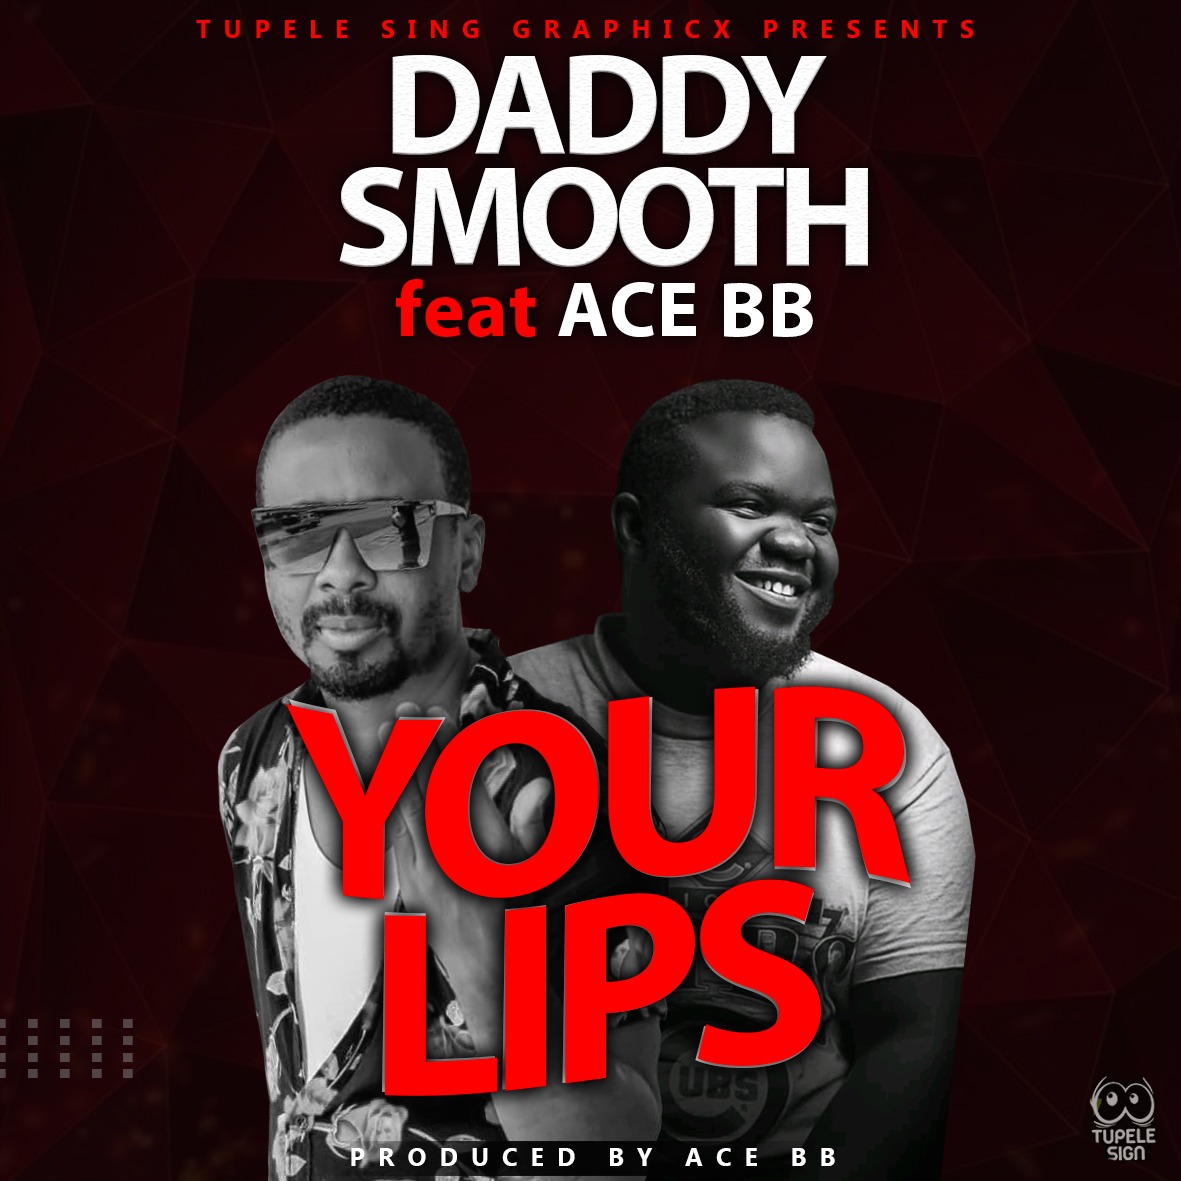 Daddy smooth ft ace BB your lips